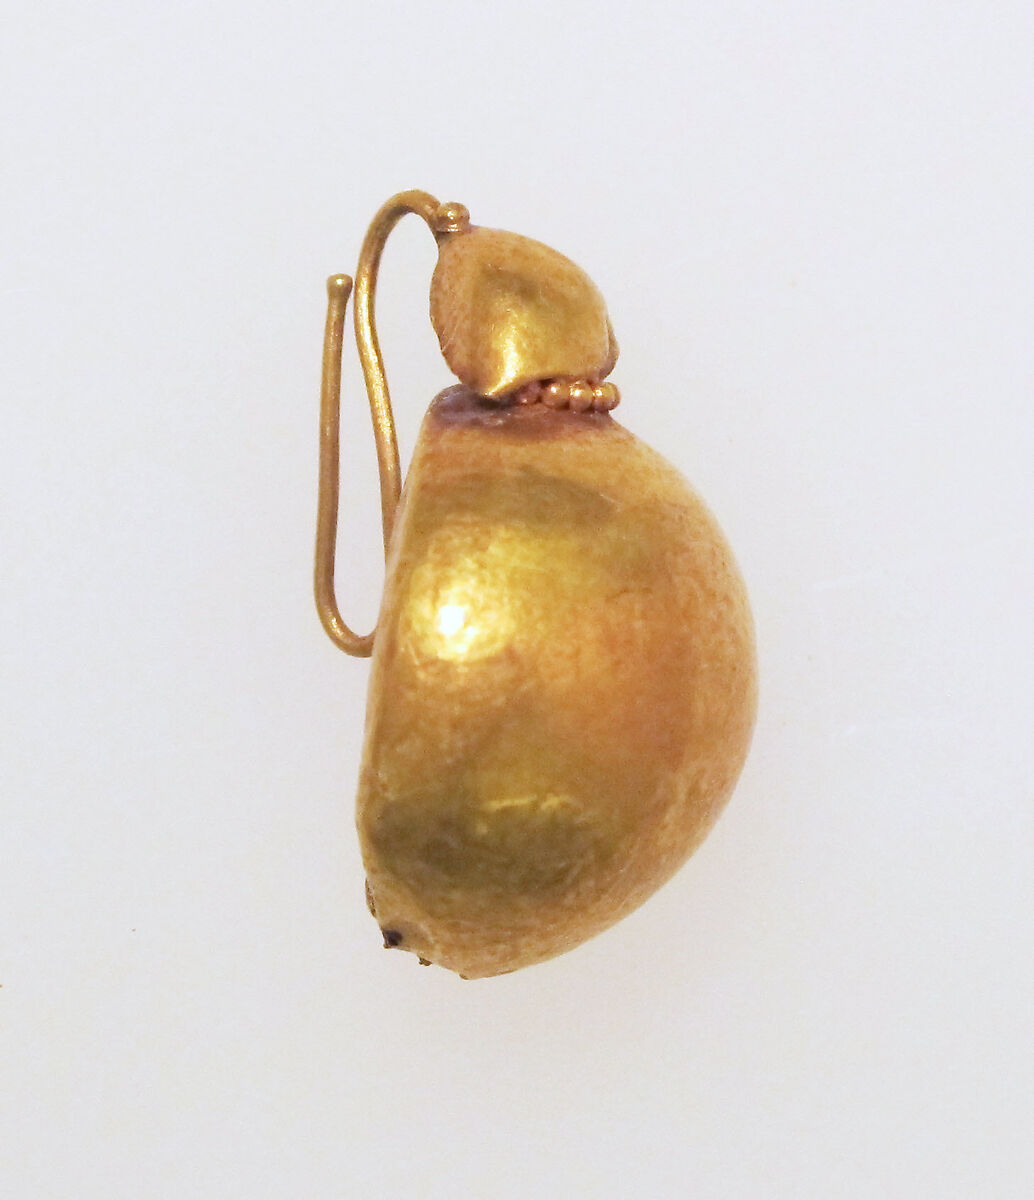 Earring-hook type with sphere ends, Gold 